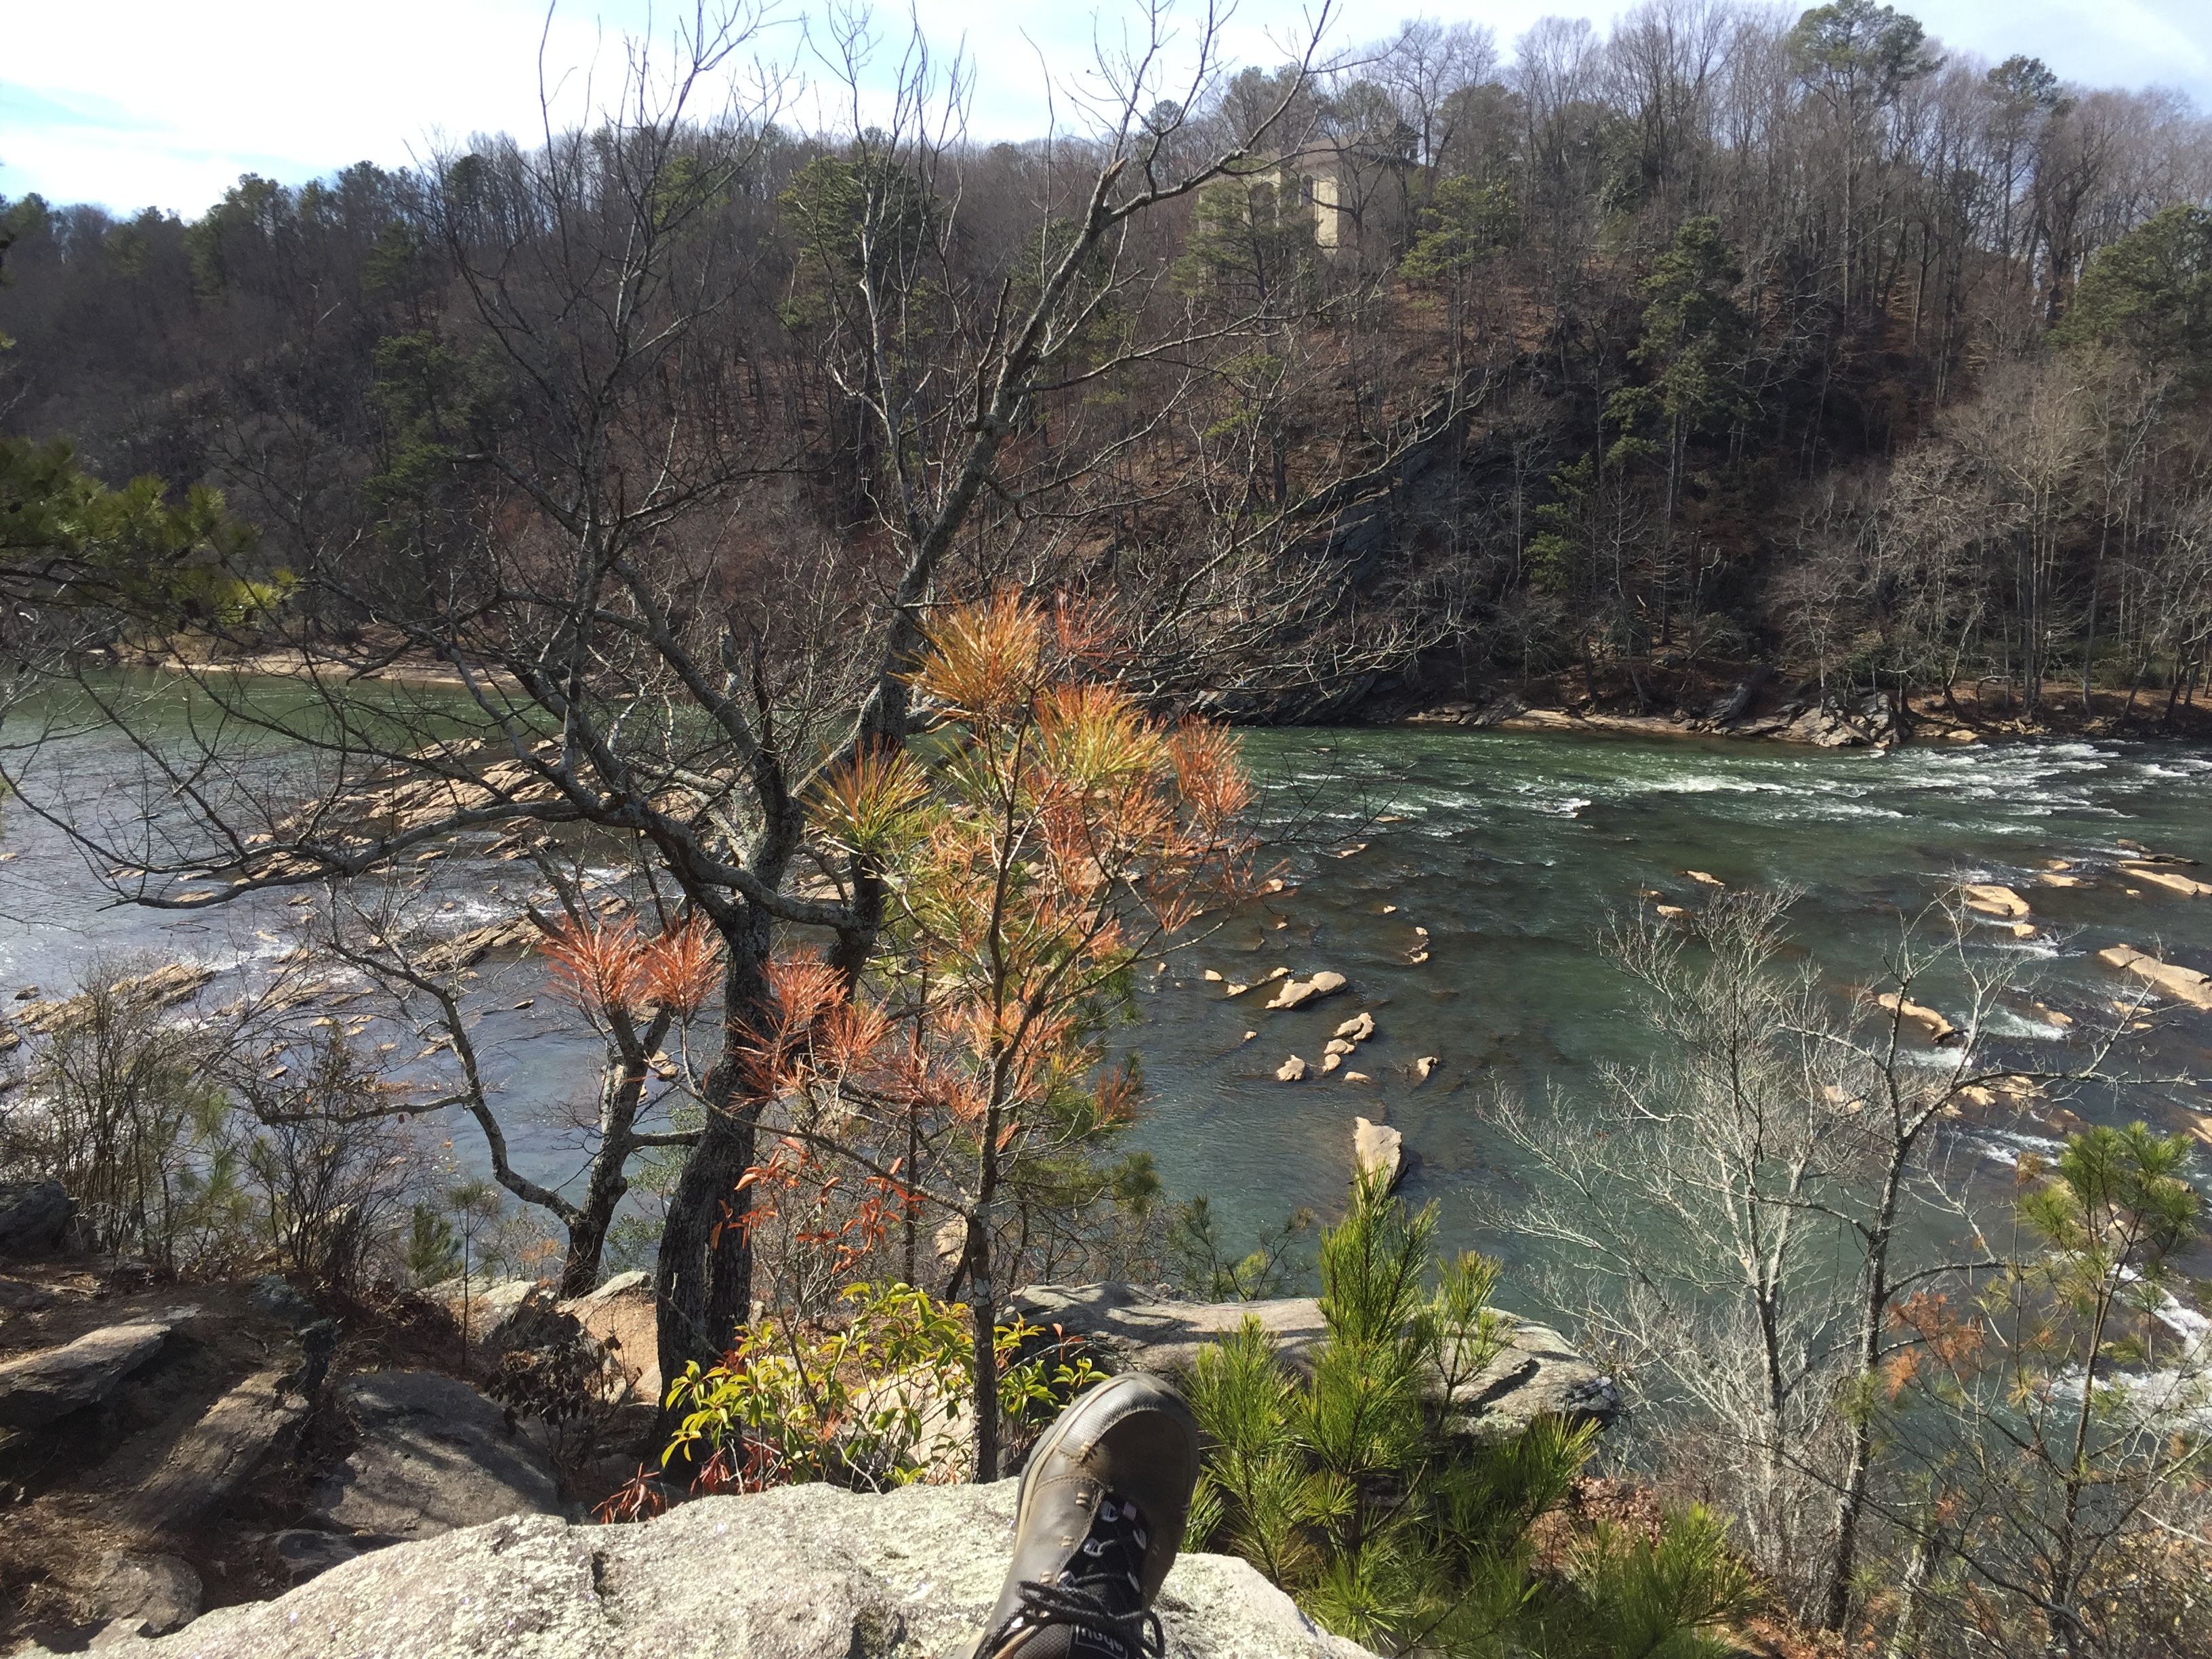 A view of the Chattahoochee River from the overlook at East Palisades